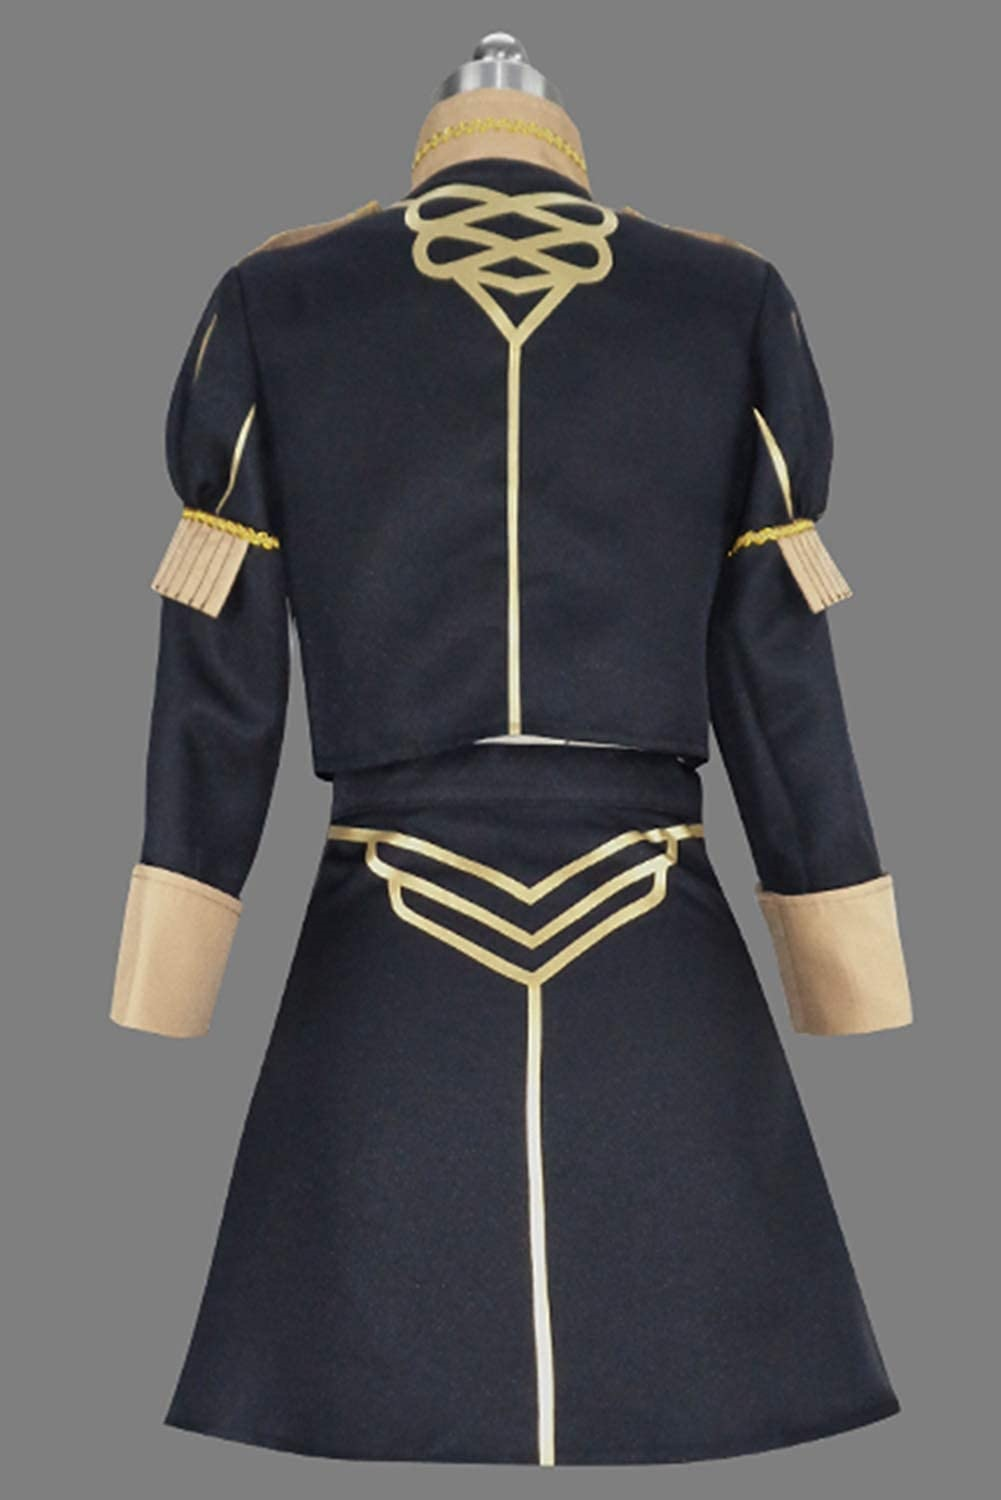 Game Fire Emblem Three Houses Dorothea Women Uniform Outfit Halloween Carnival Costume Cosplay Costume 1